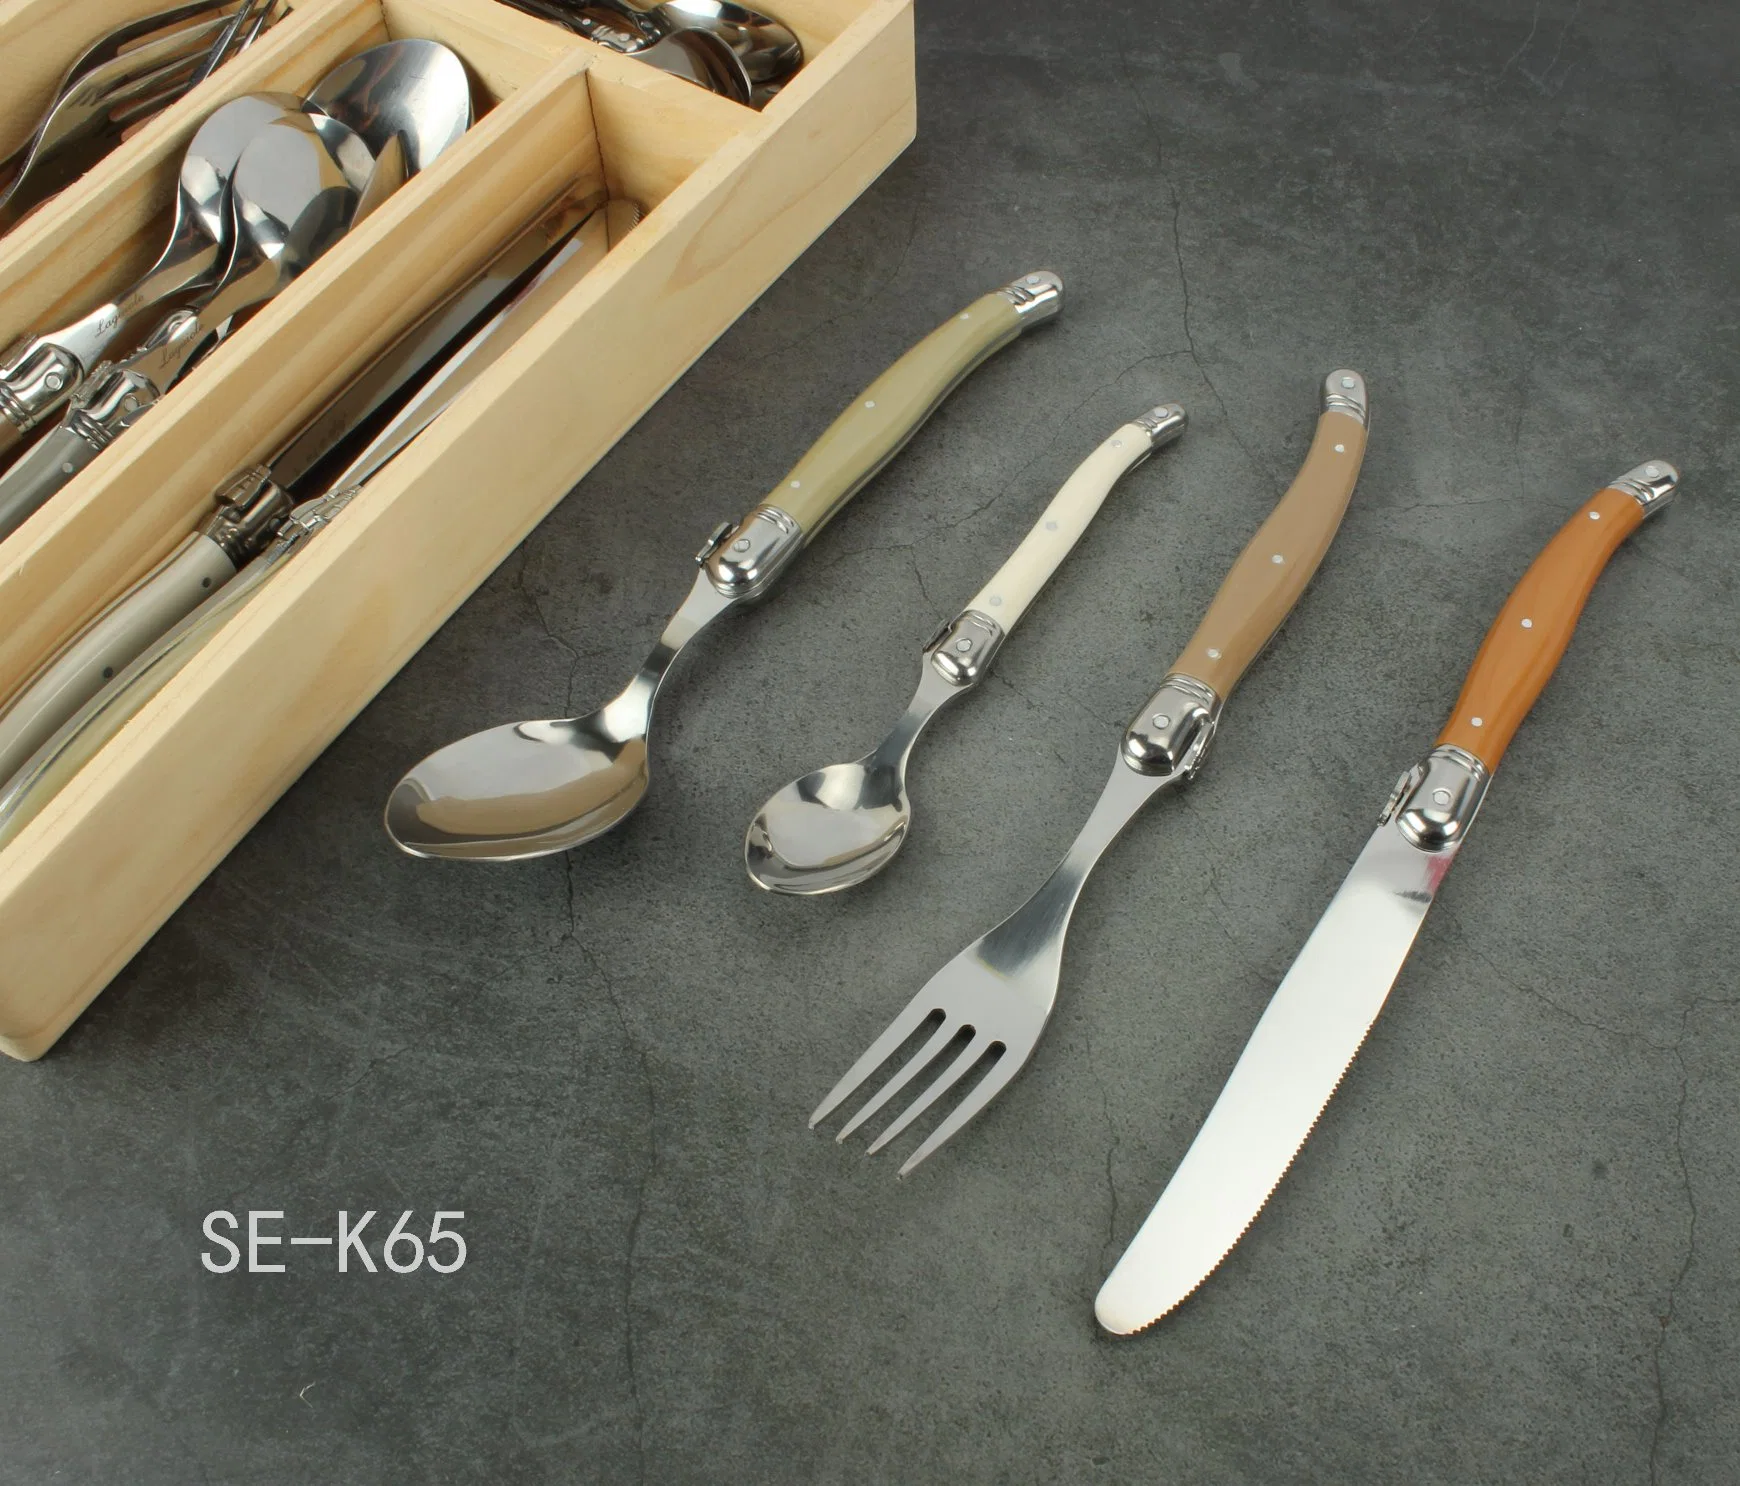 24 Pieces Cutlery Set with Colorful Handle (SE-K65)